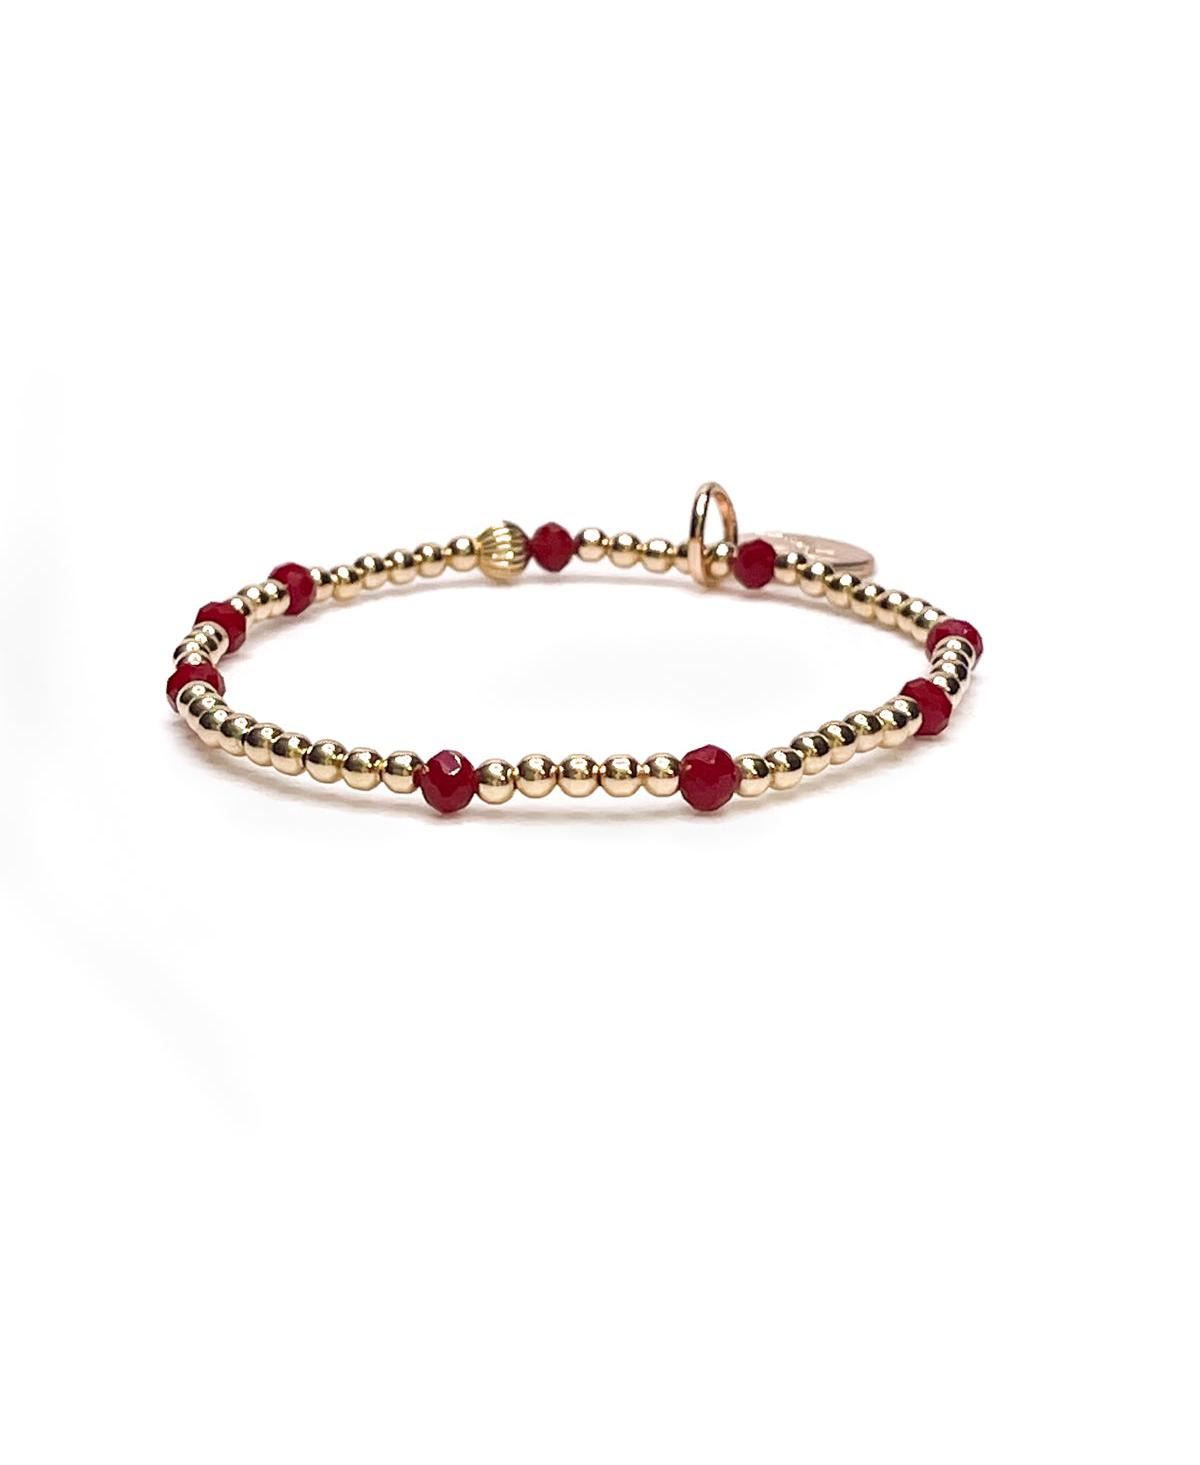 Non-Tarnishing Gold filled, 3mm Gold Ball and Ruby Glass Bead Stretch Bracelet - Gold  red